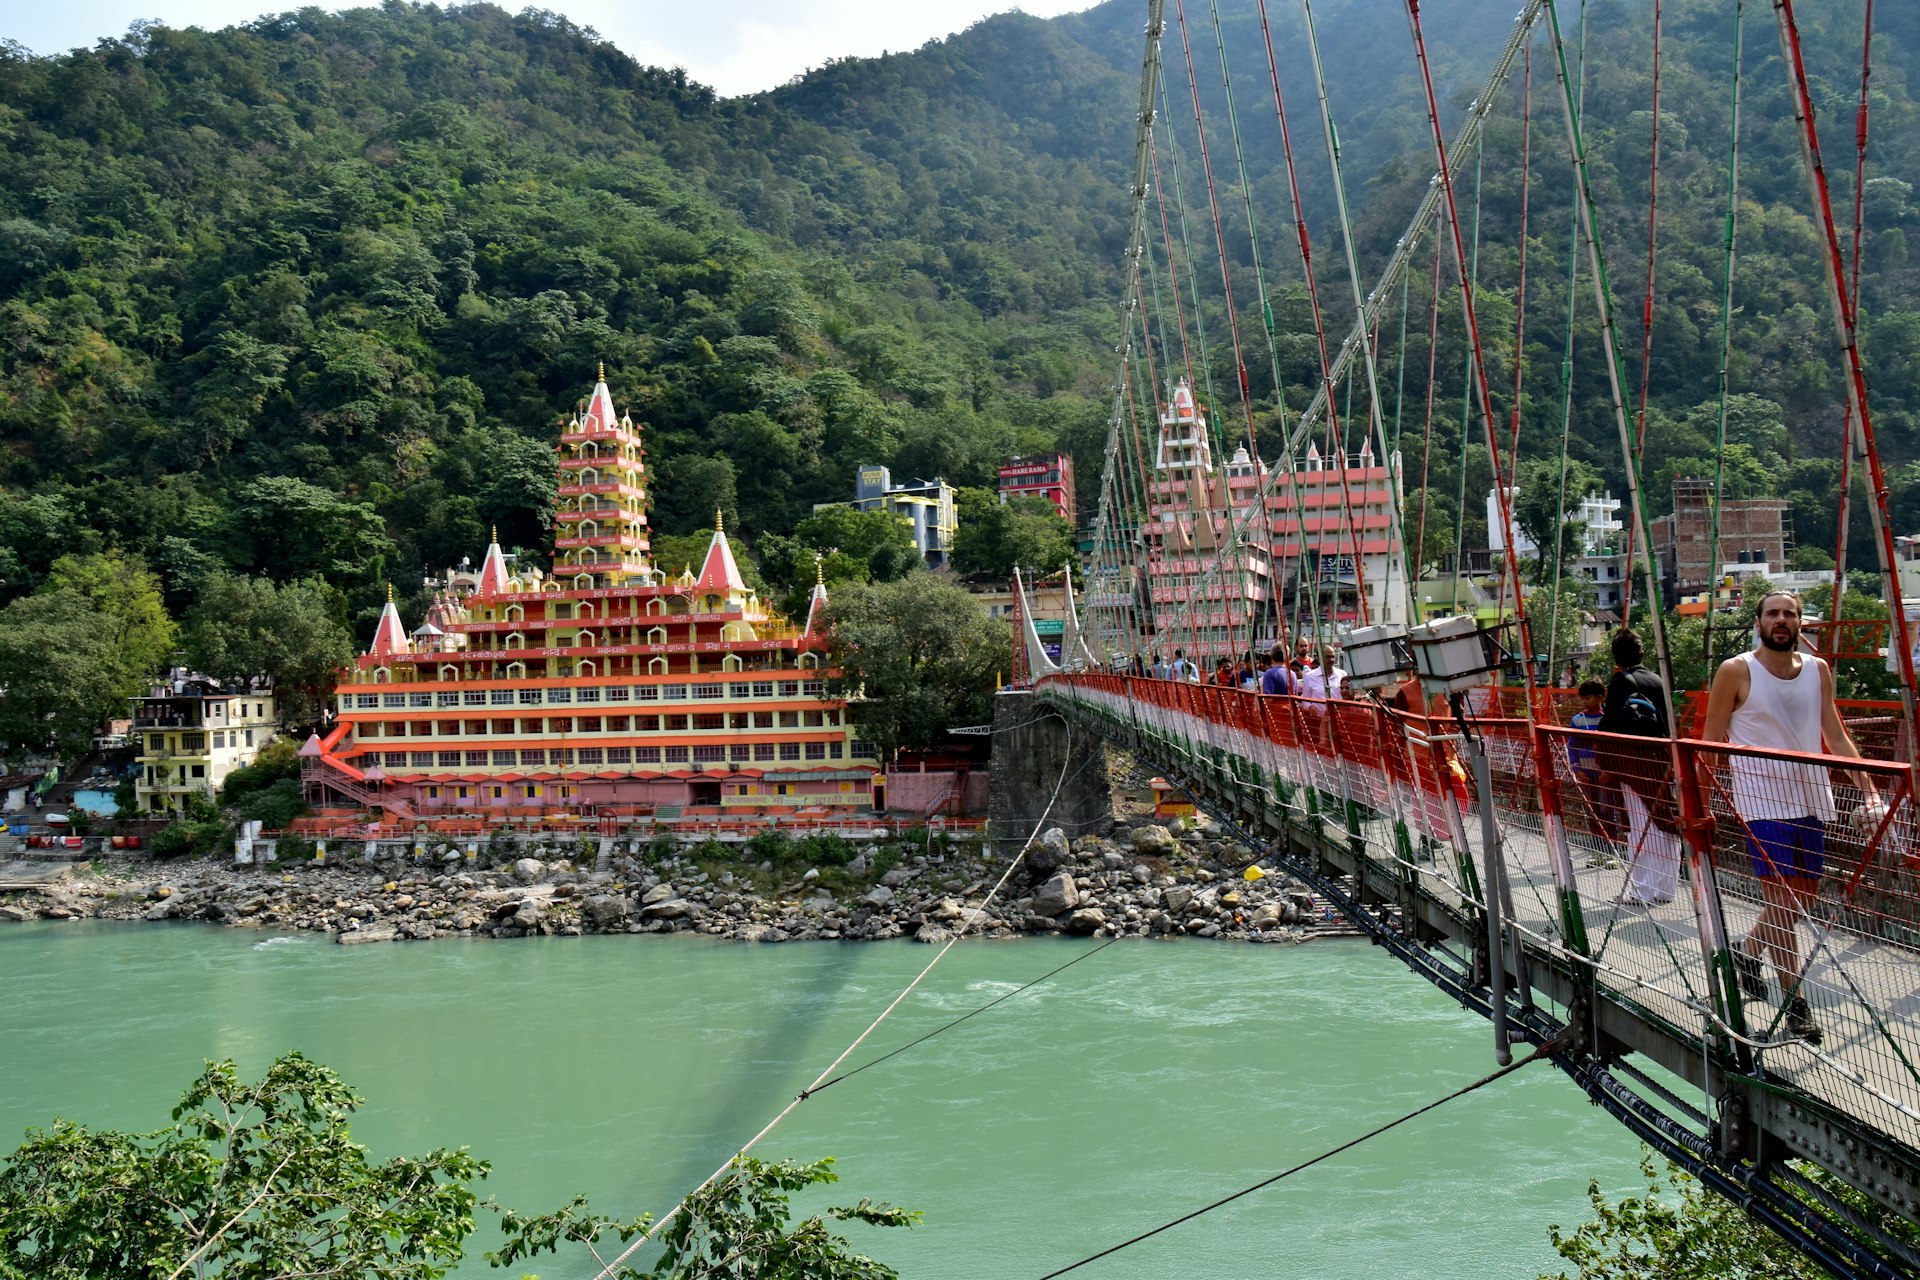 People cross a suspension bridge leading over a wide river towards a temple building surrounded by woodland